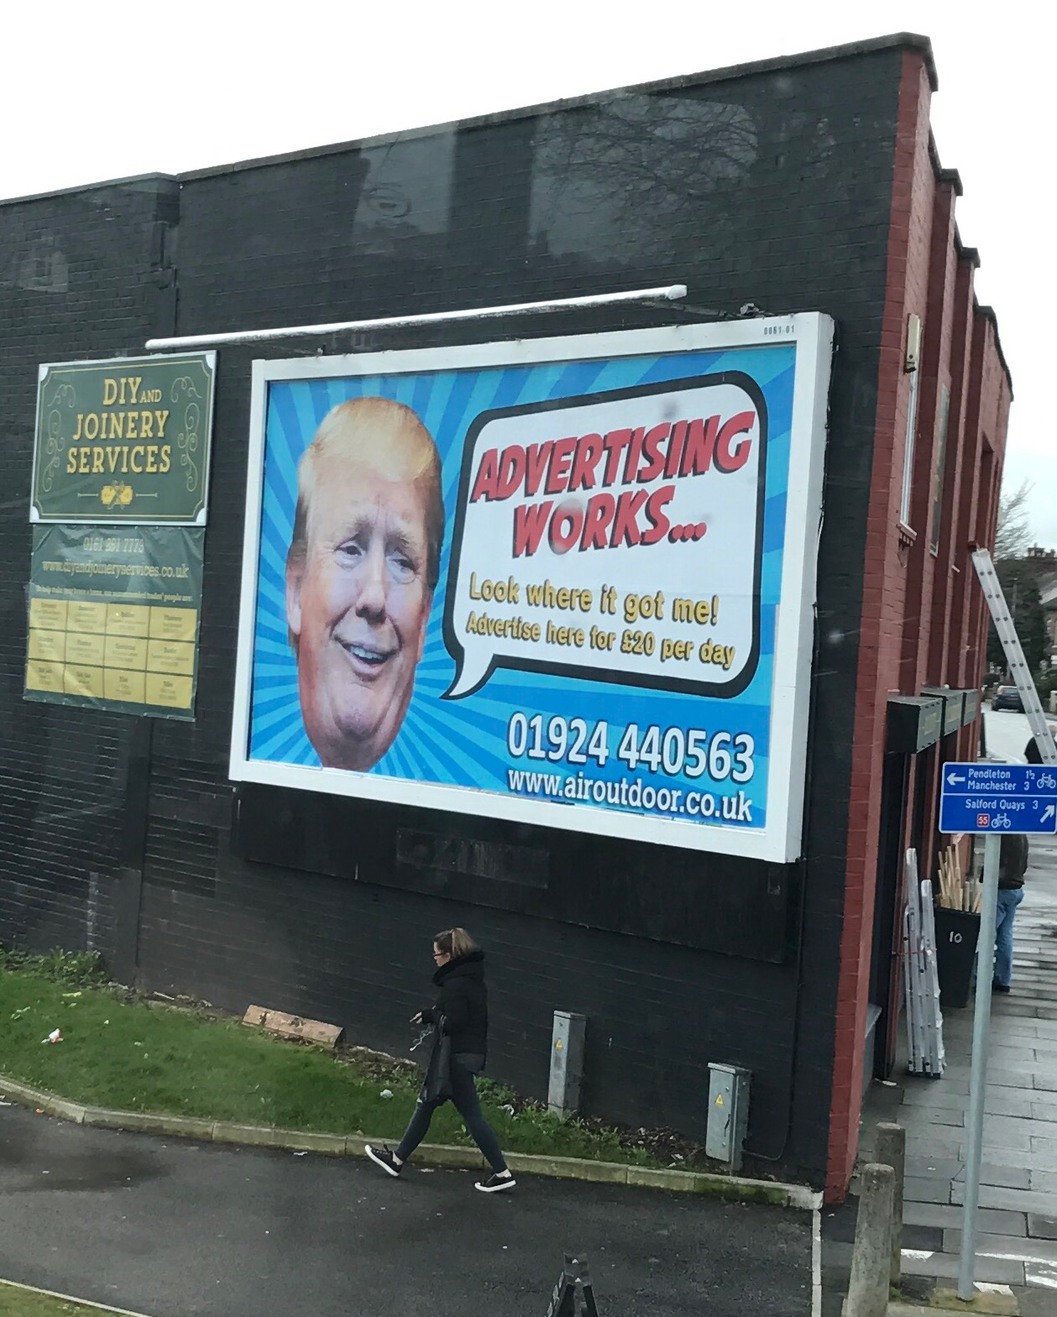 advertising for an advertisement in the UK - meme